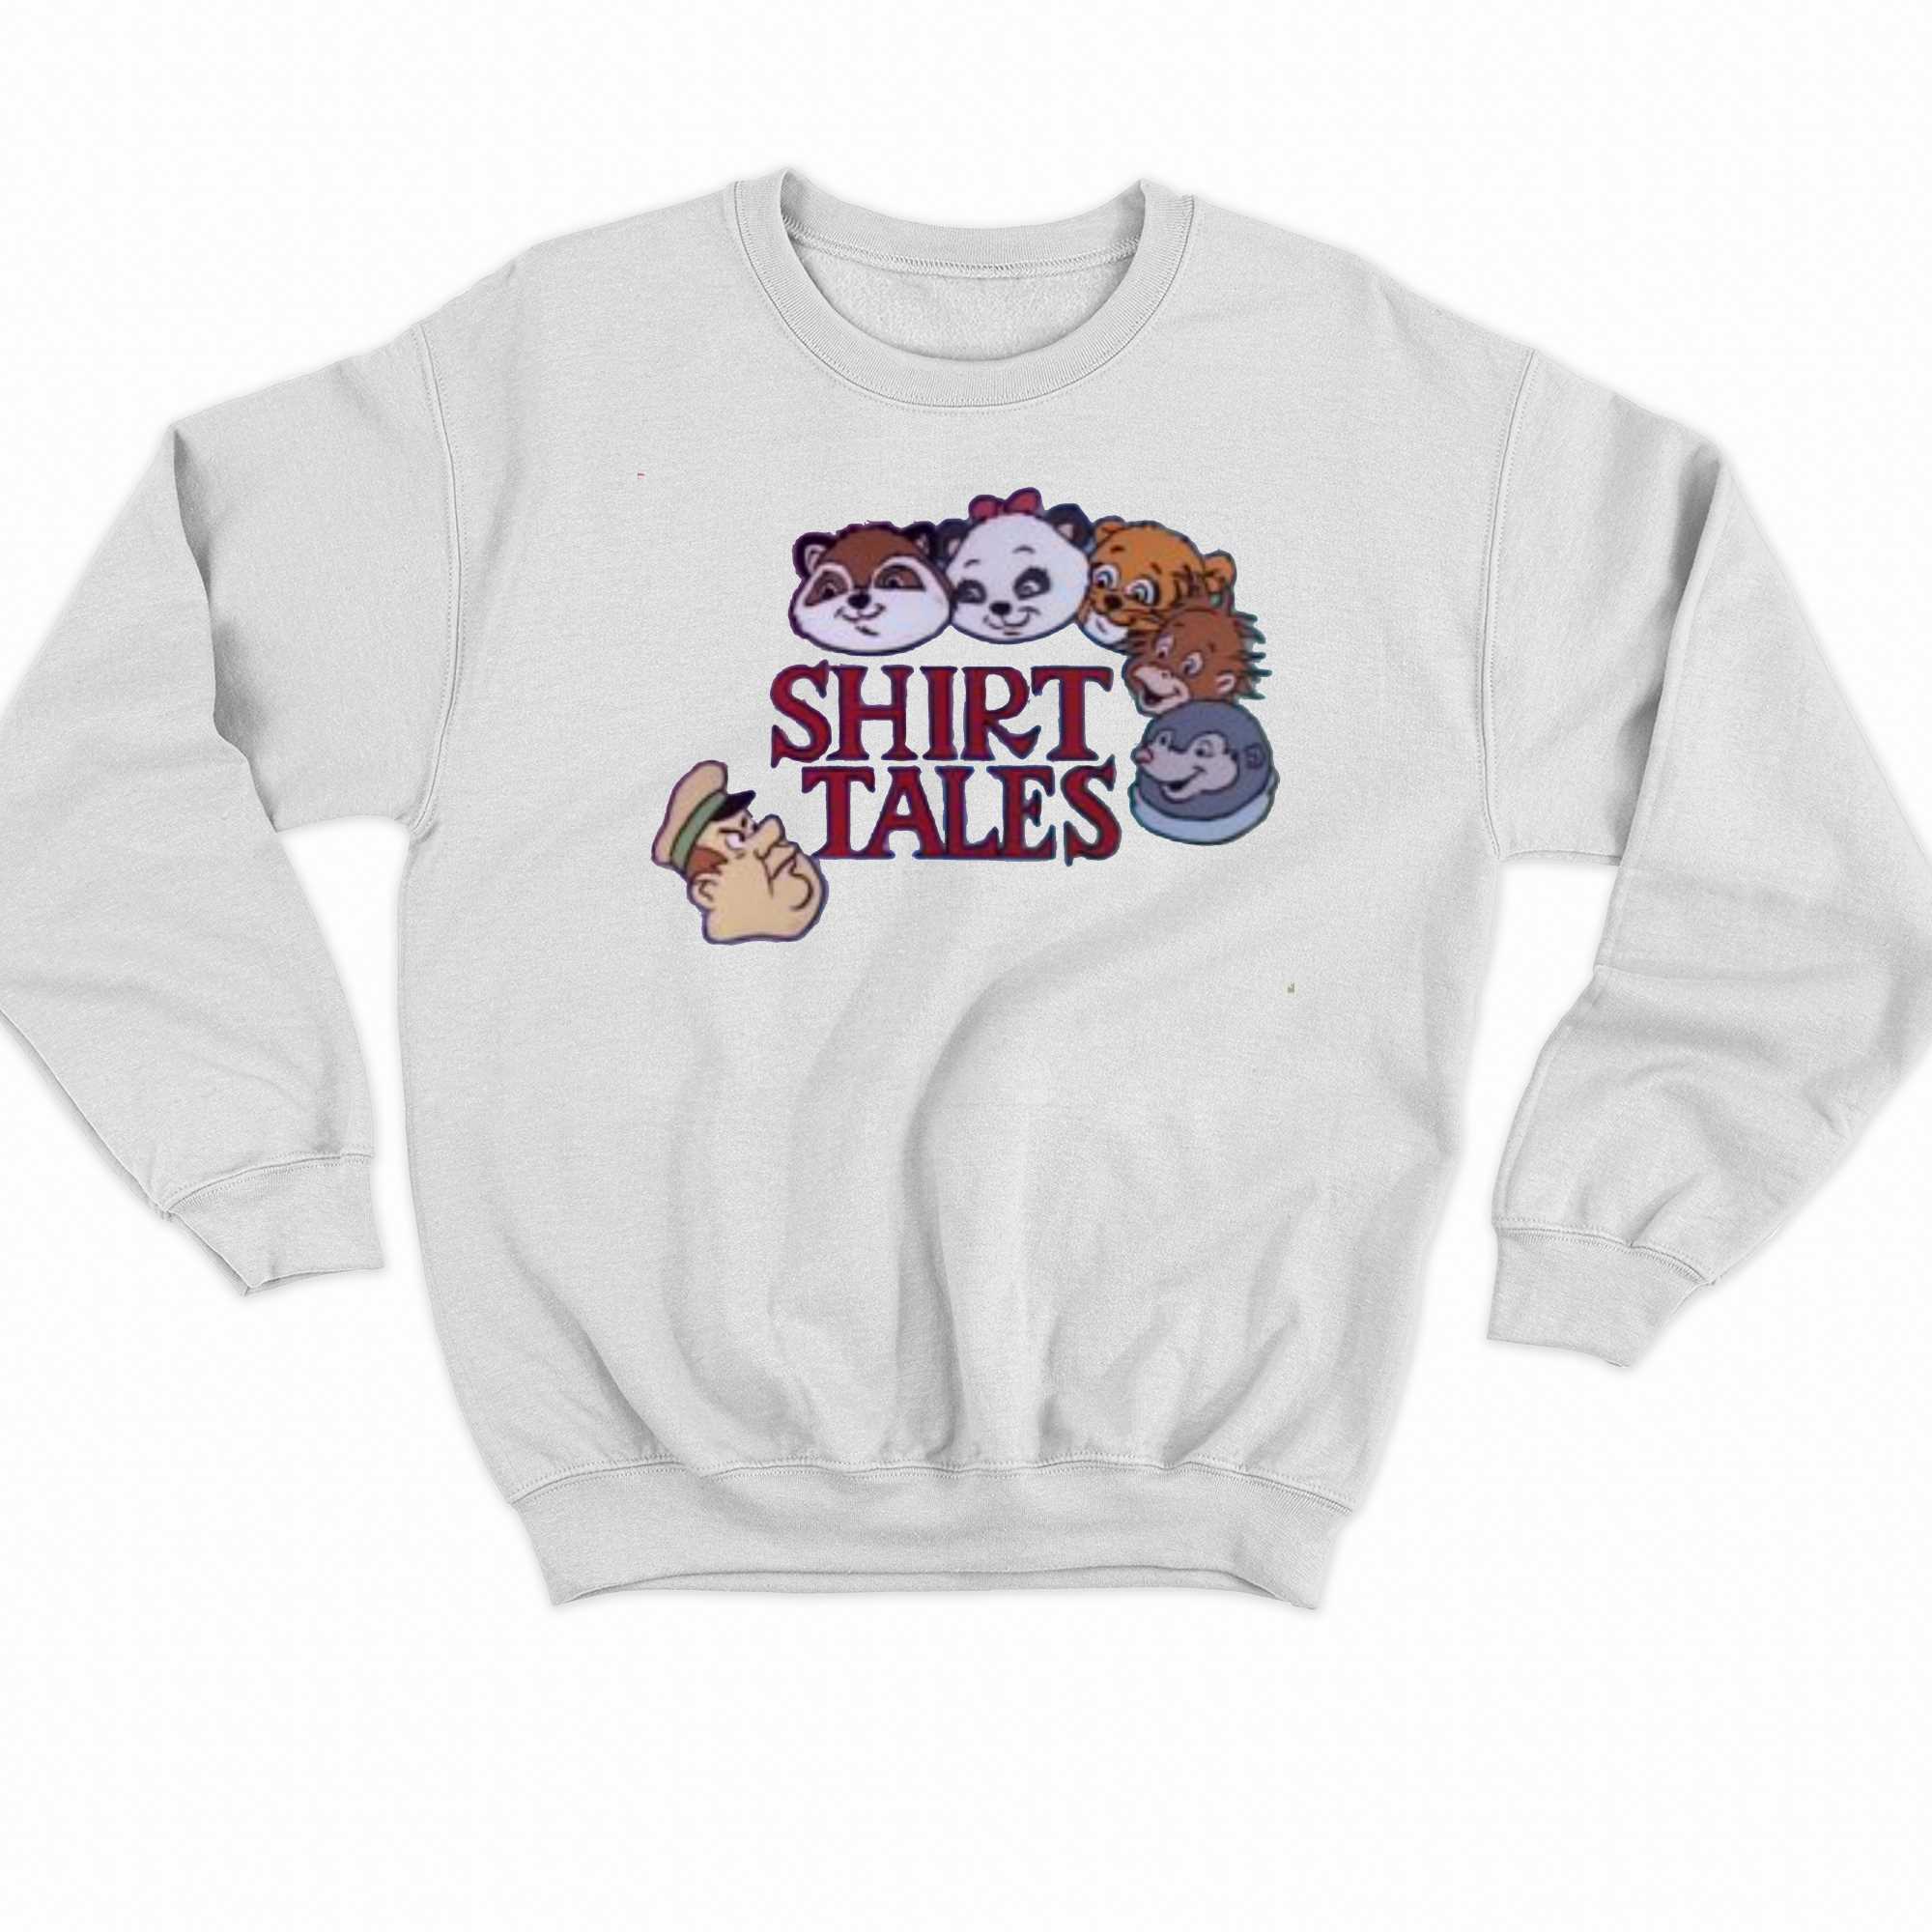 Who Remember Shirt Tales 